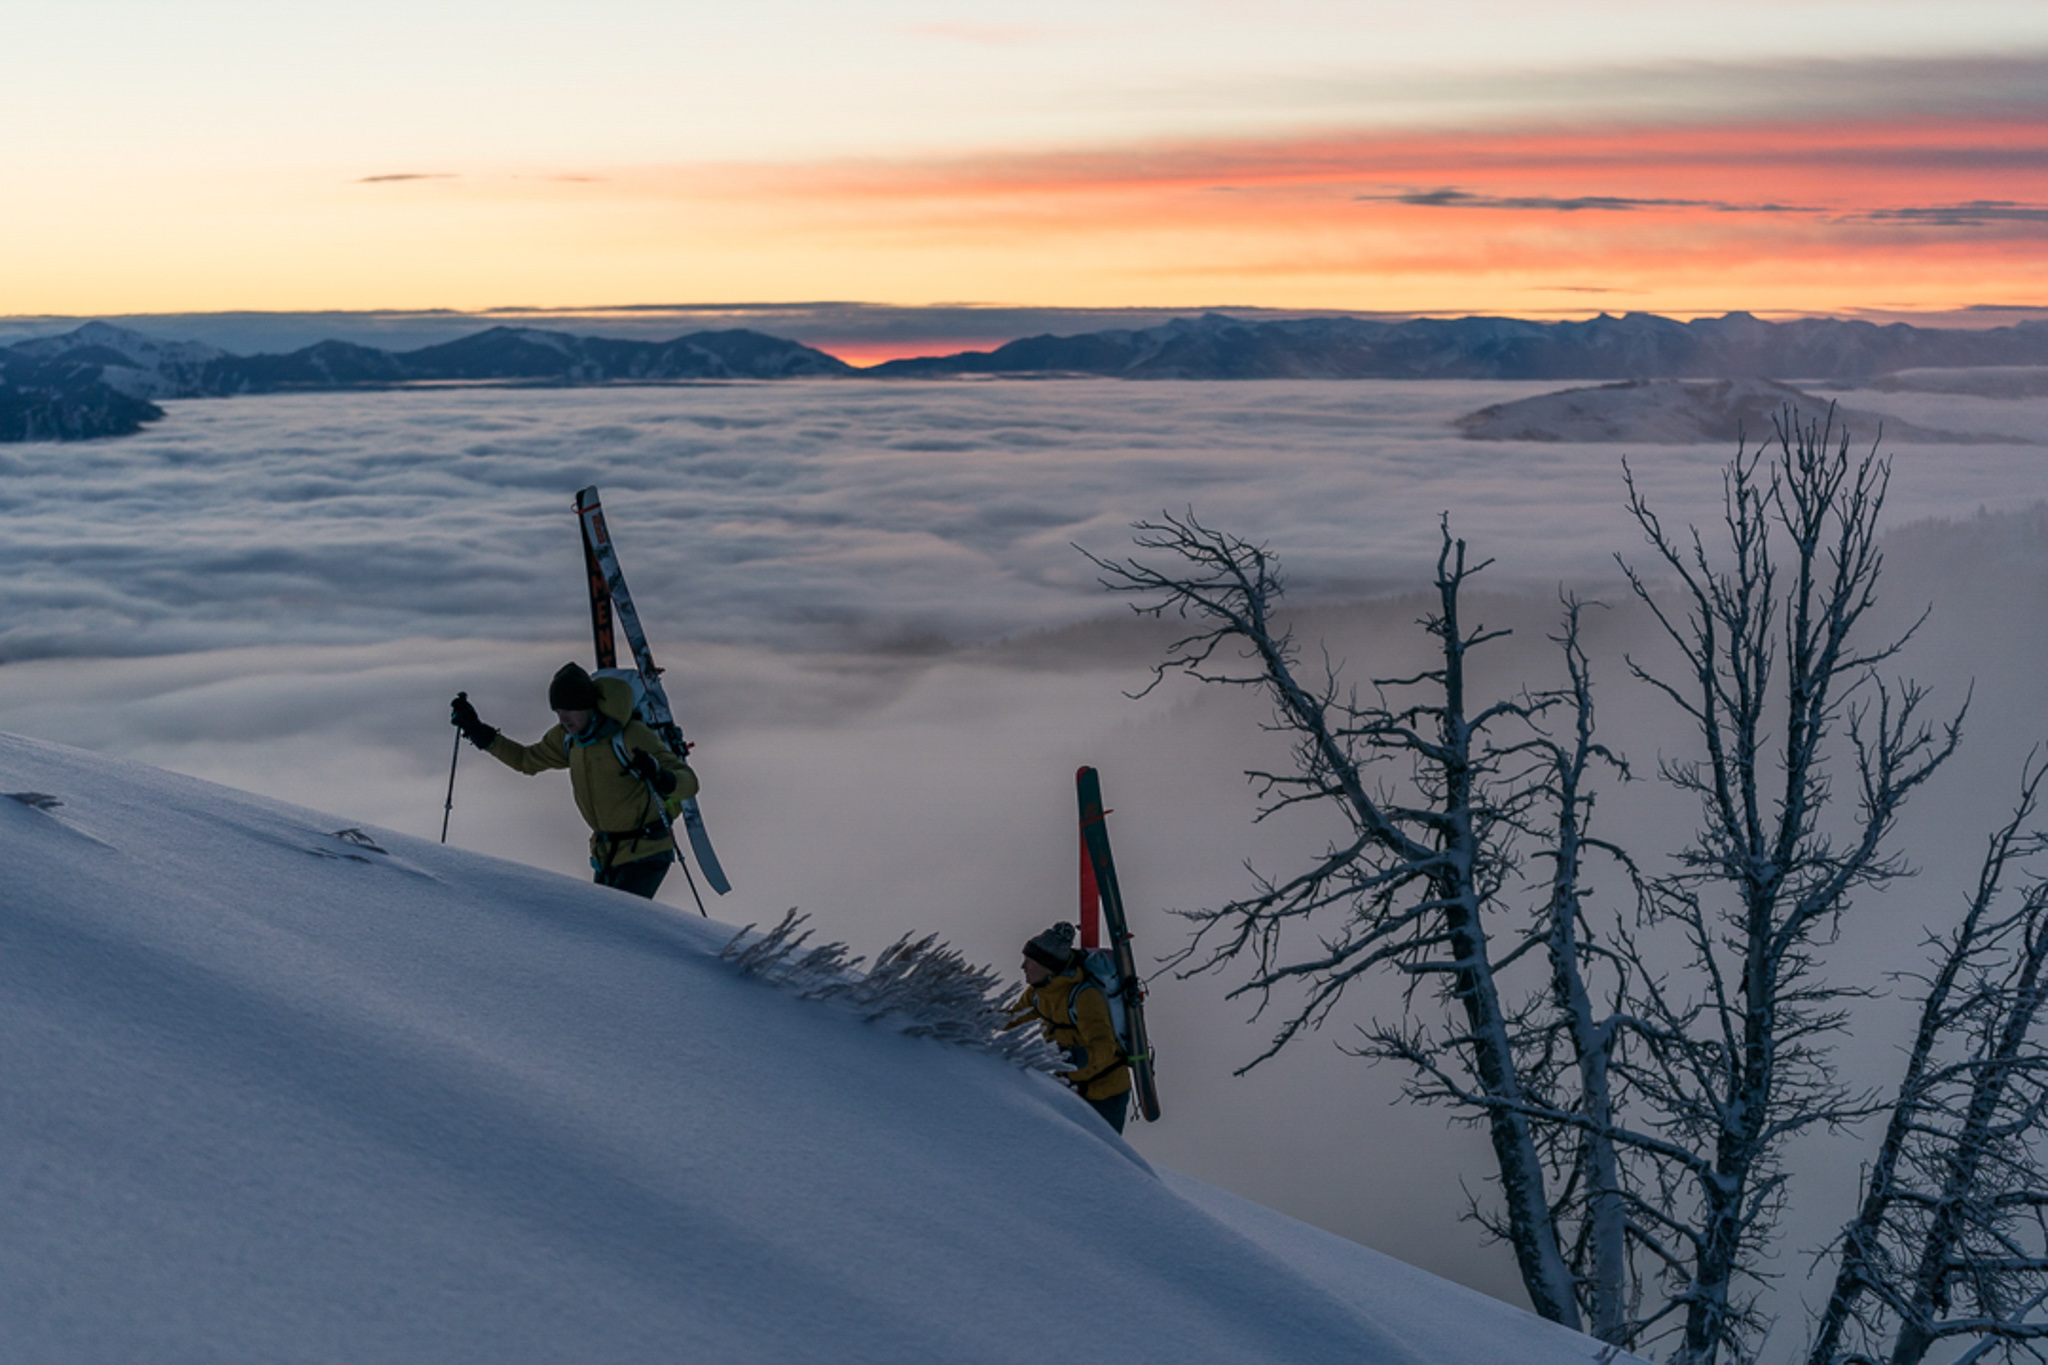 Teton Valley Magazine – Ski Touring, Here and in the Himalayas